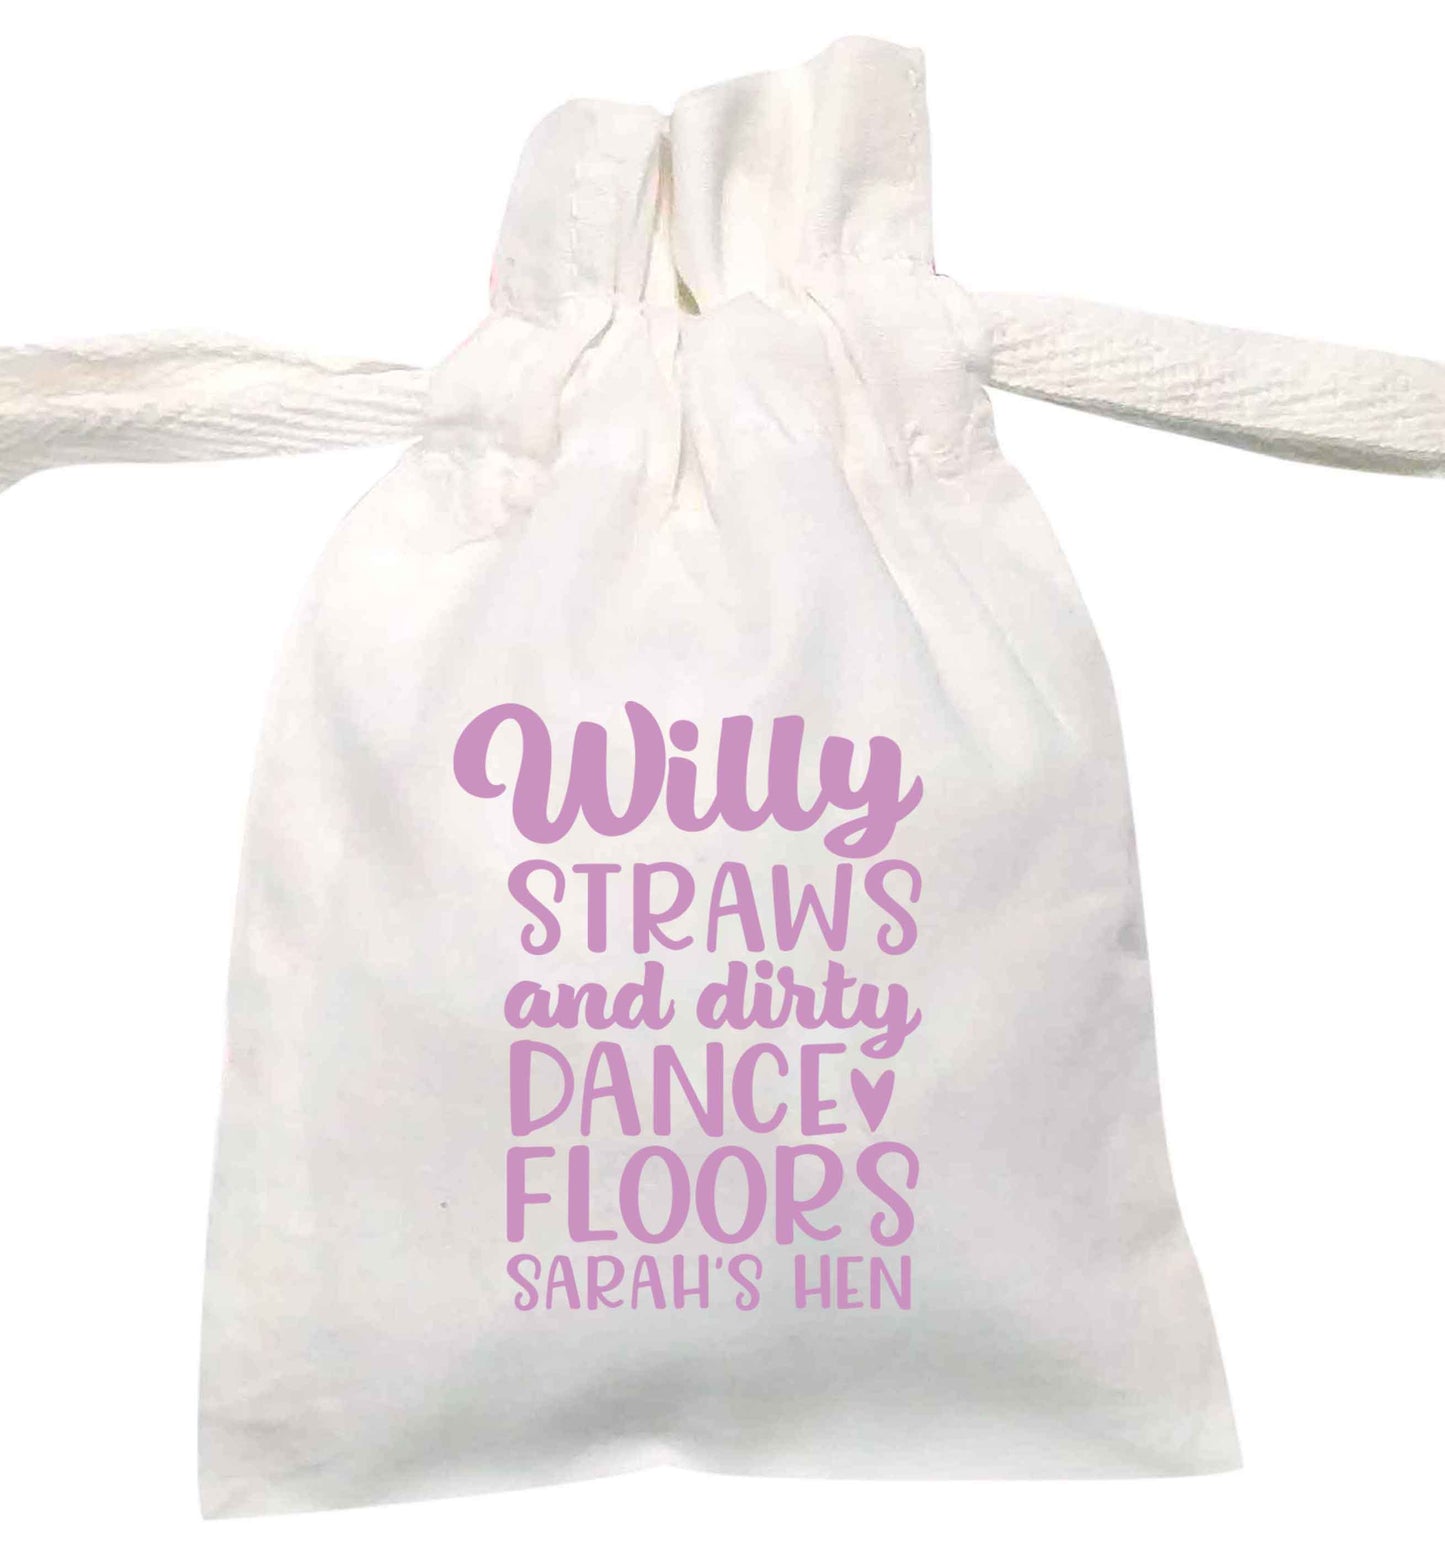 Willy straws and dirty dance floors | XS - L | Pouch / Drawstring bag / Sack | Organic Cotton | Bulk discounts available!